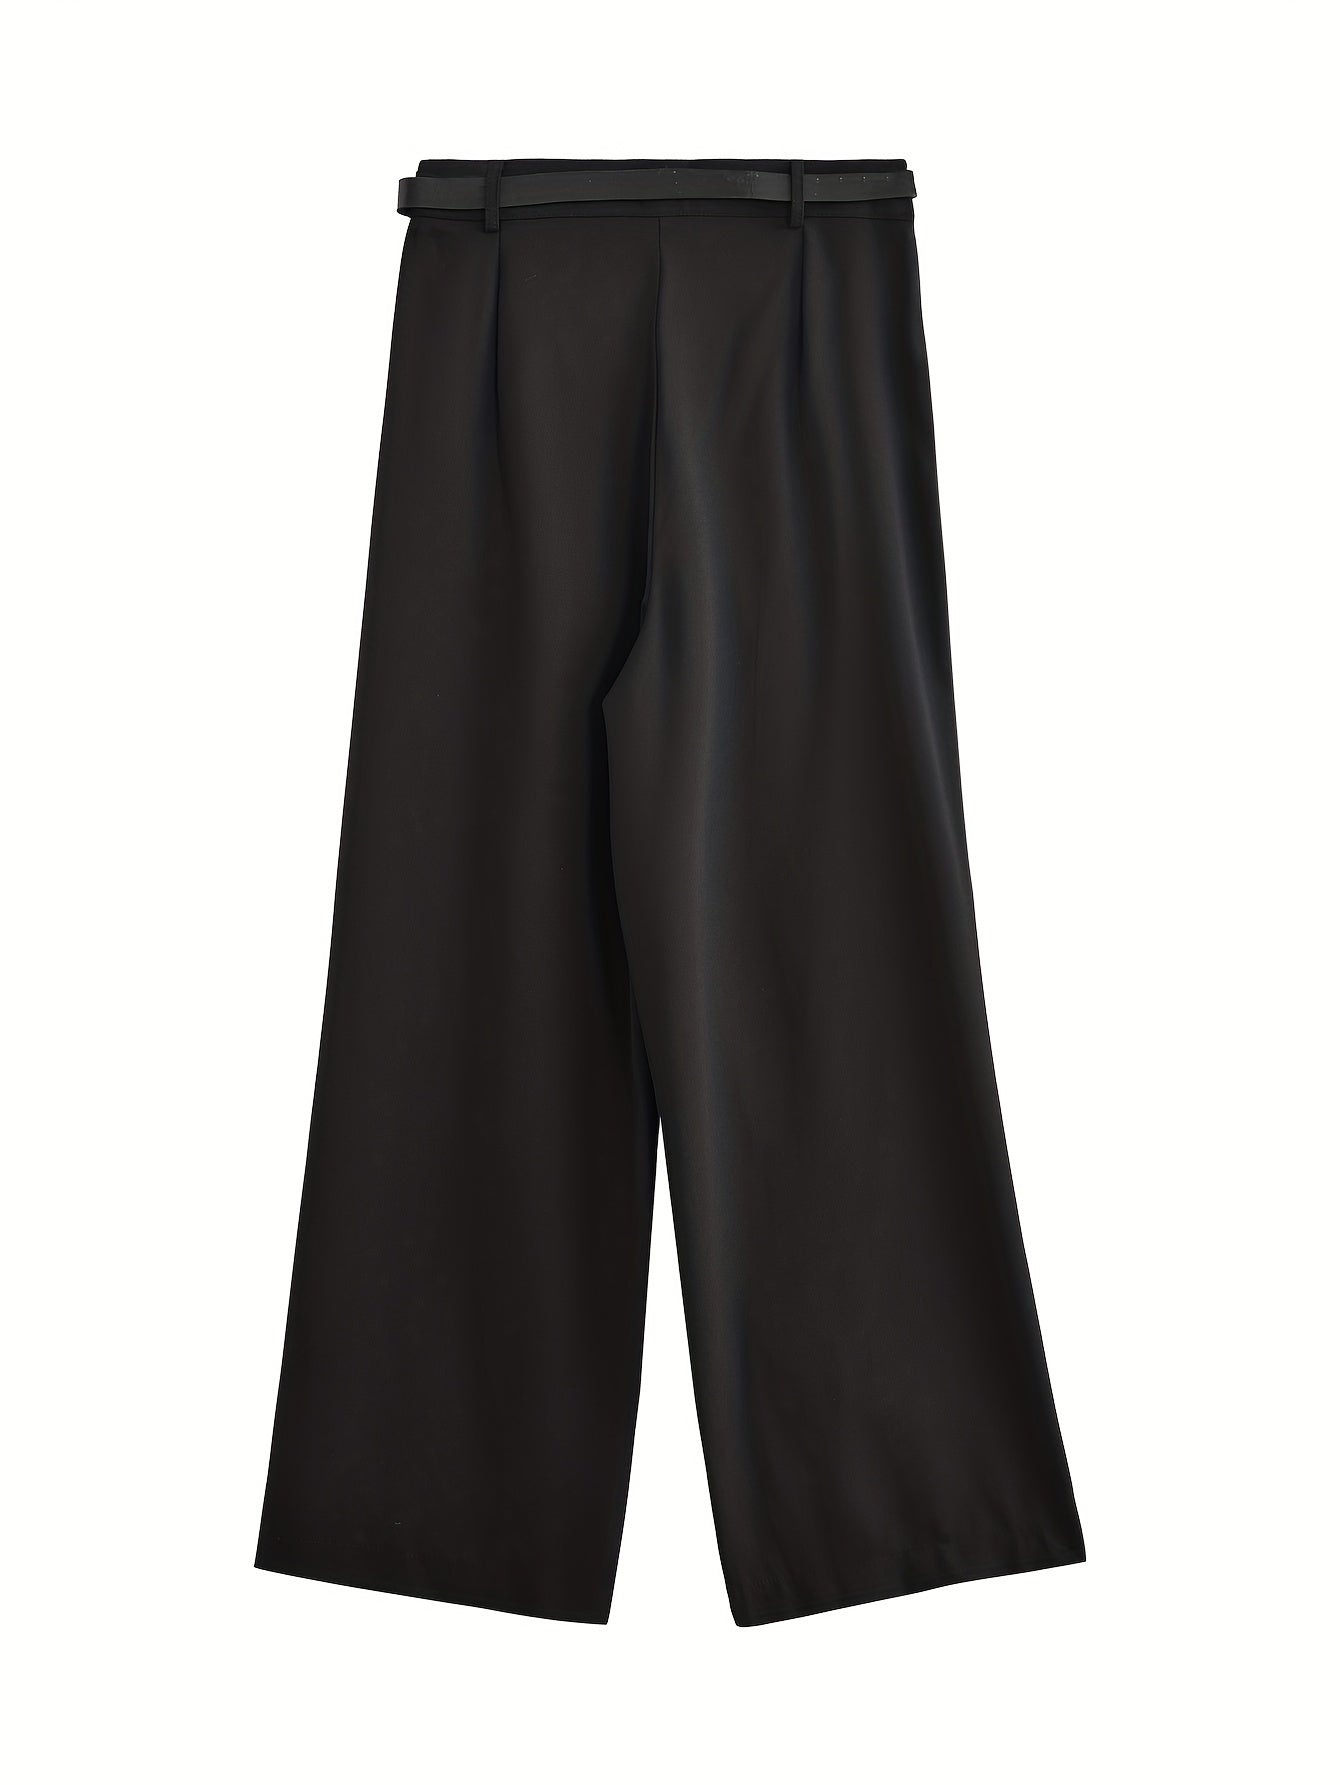 vlovelaw  Solid Pleated Wide Leg Tailored Pants, Casual High Waist Pants, Women's Clothing